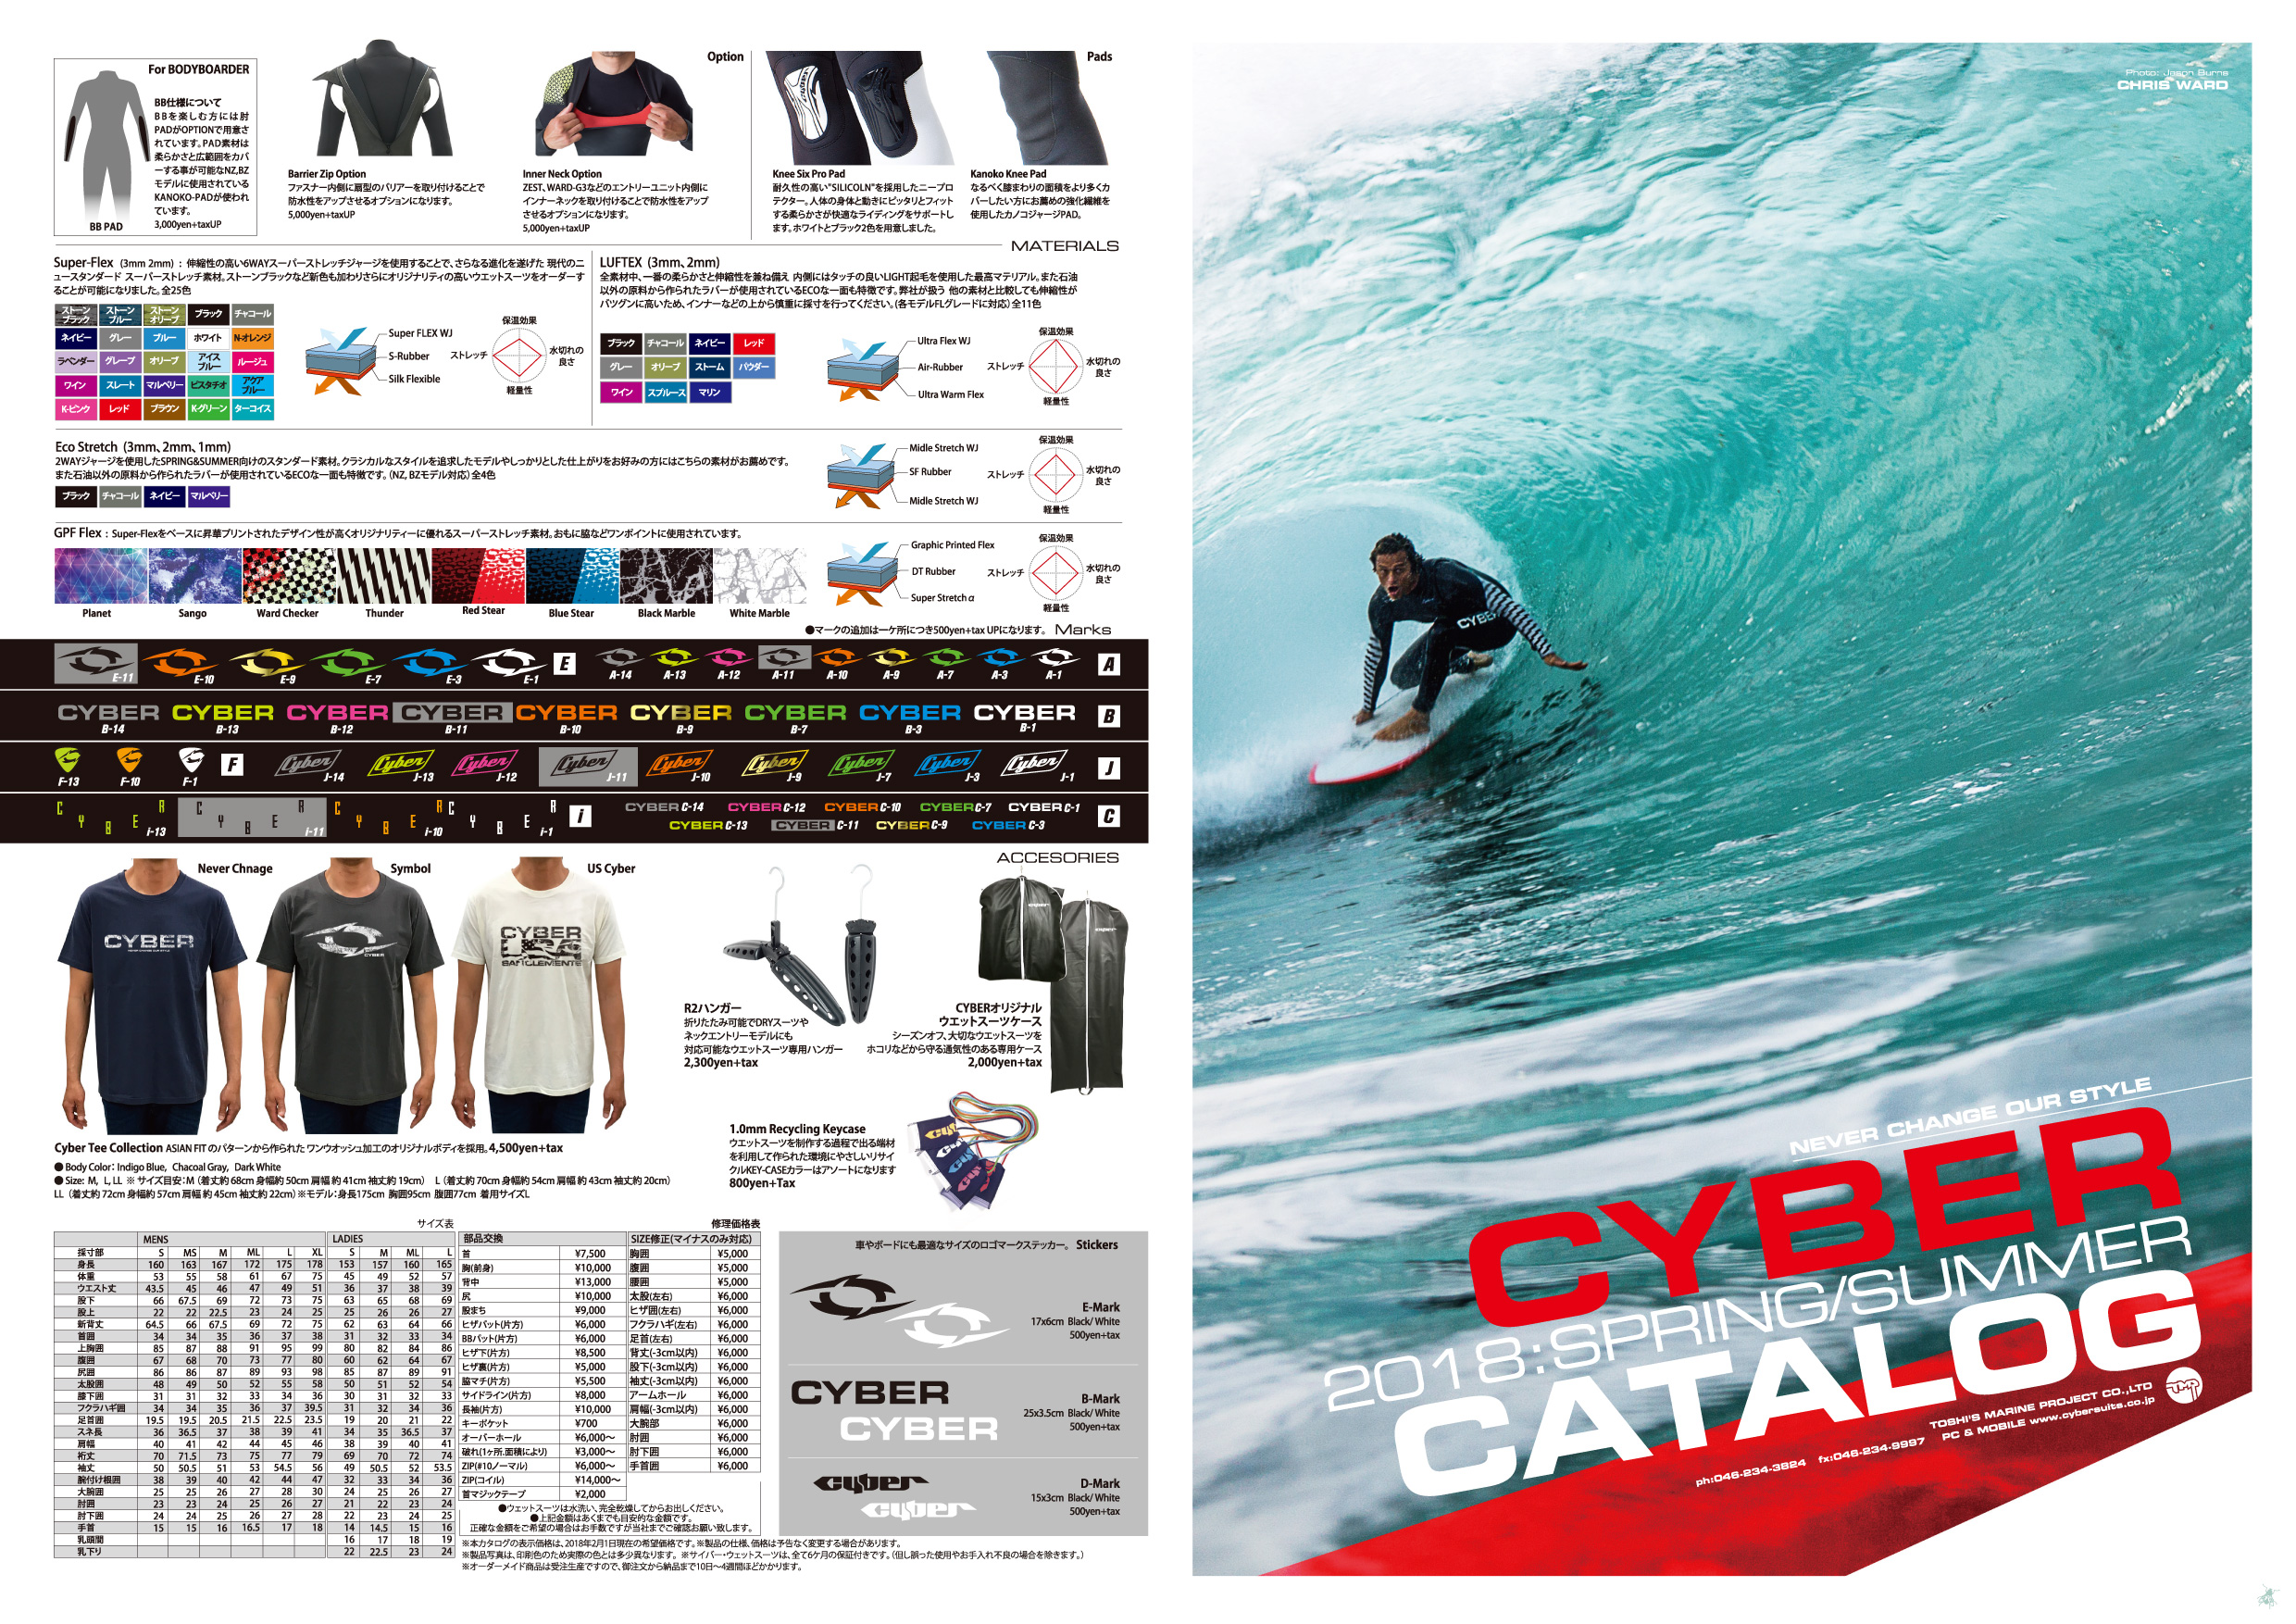 Cyber_Wetsuits